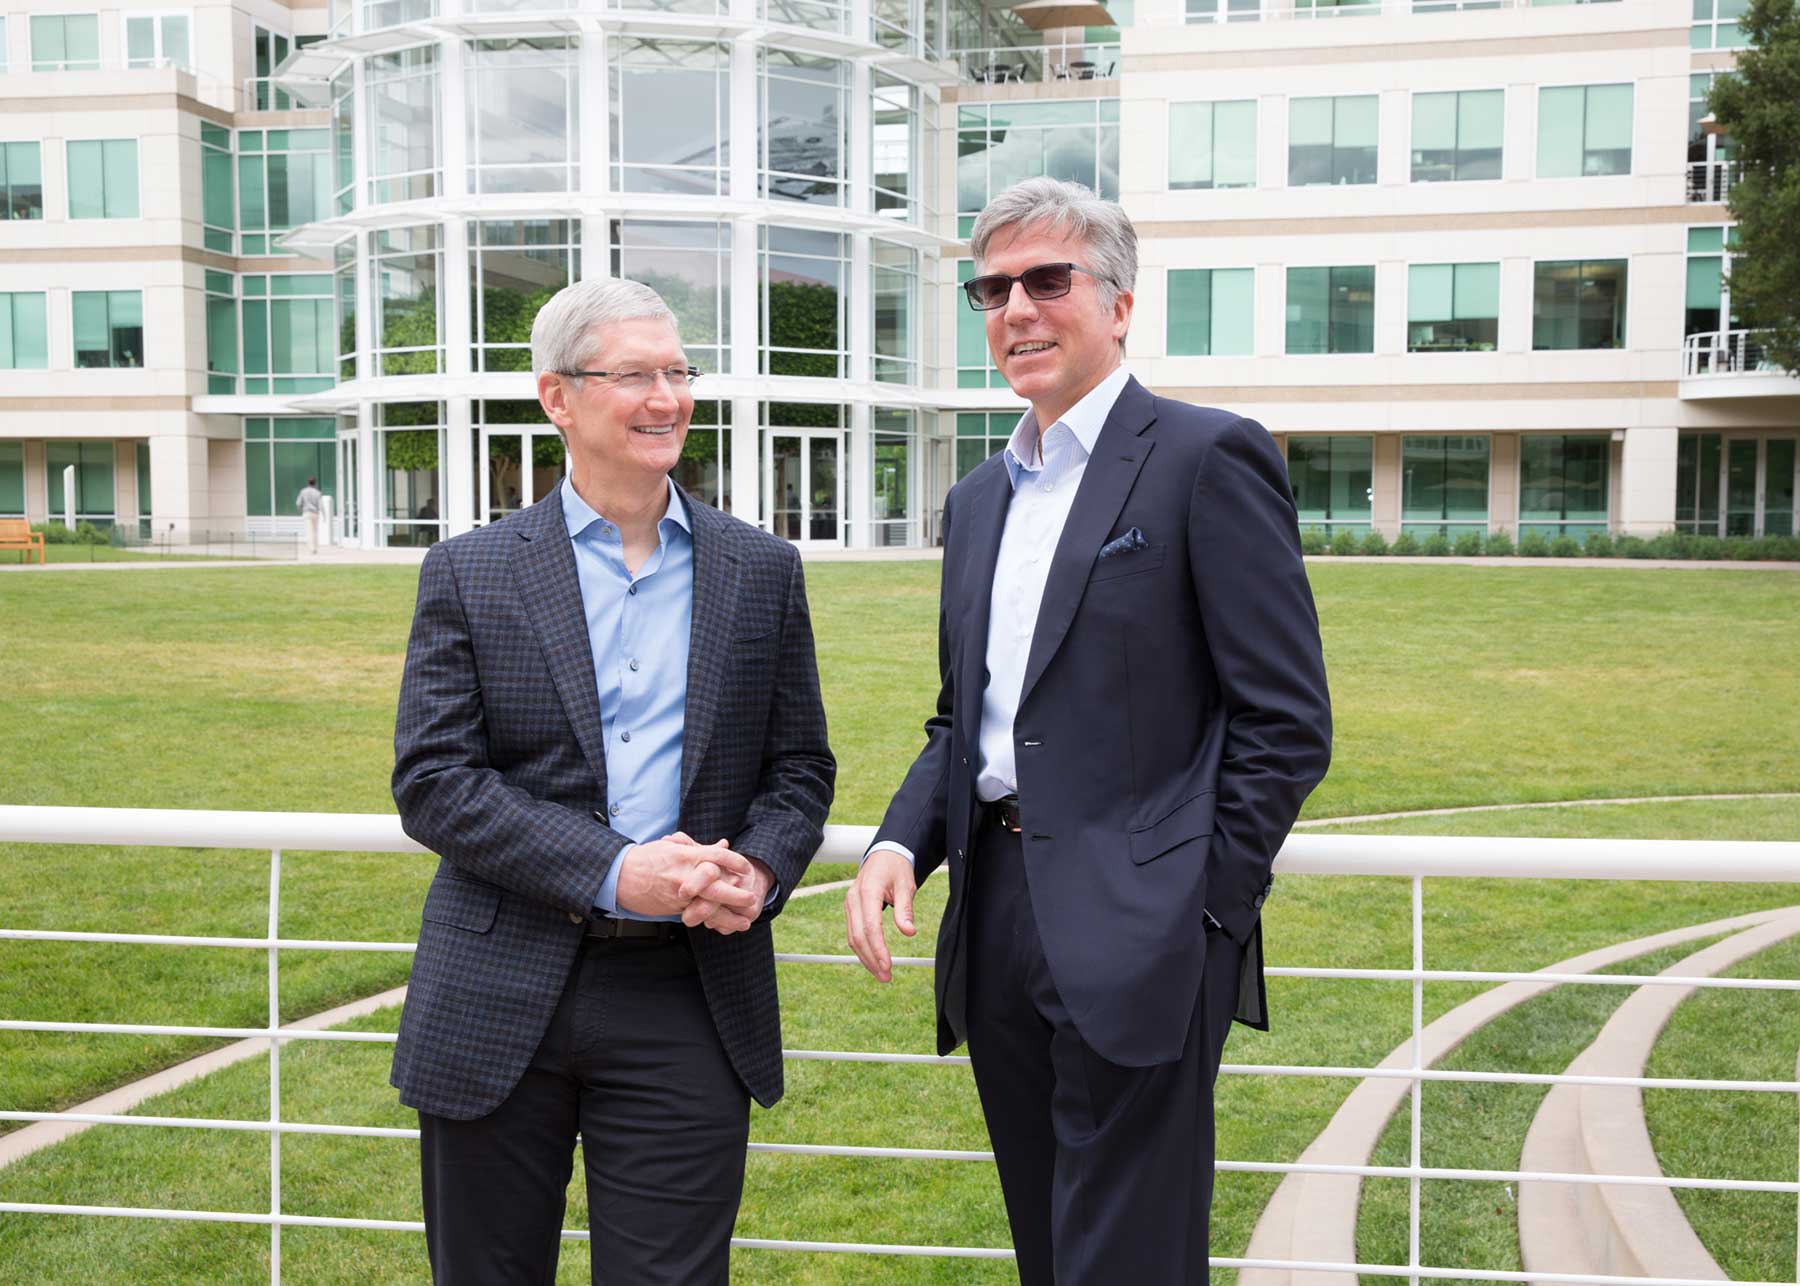 Apple CEO Tim Cook and SAP CEO Bill McDermott meet at Apple’s campus in Cupertino to announce a new partnership to revolutionize work on iPhone and iPad. Courtesy of Apple/Roy Zipstein